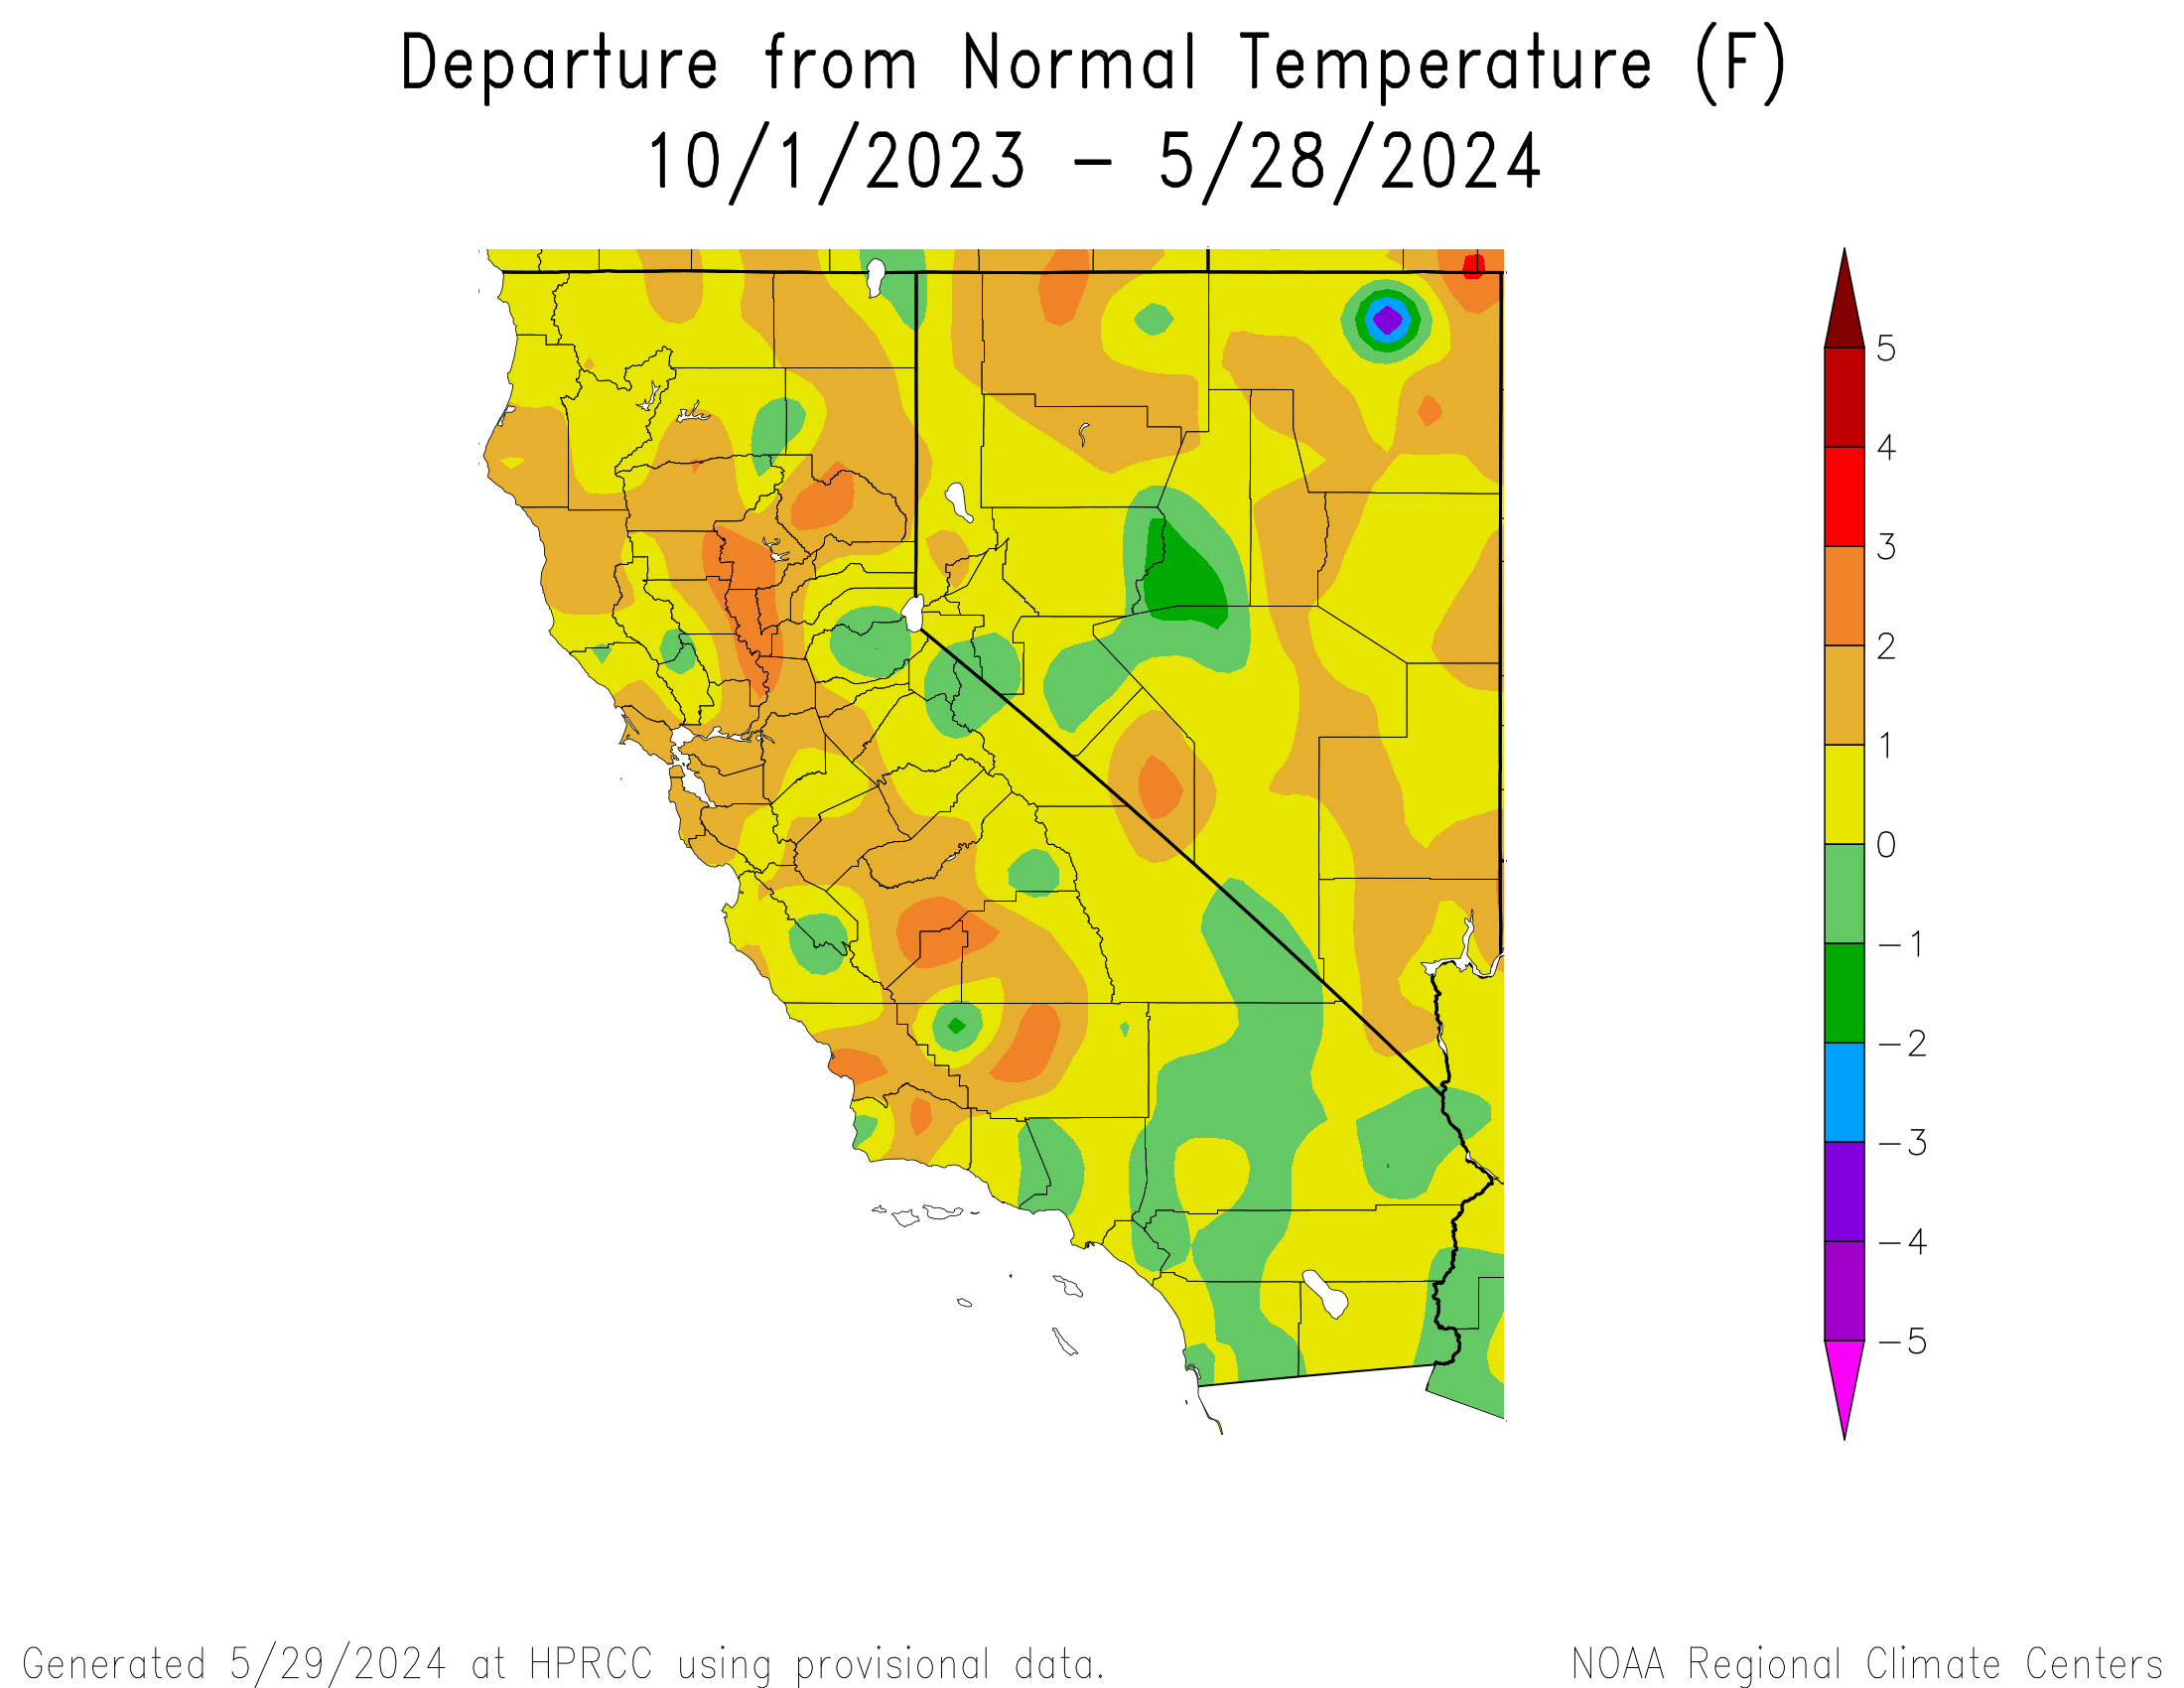 Departure from Normal Temperature for California